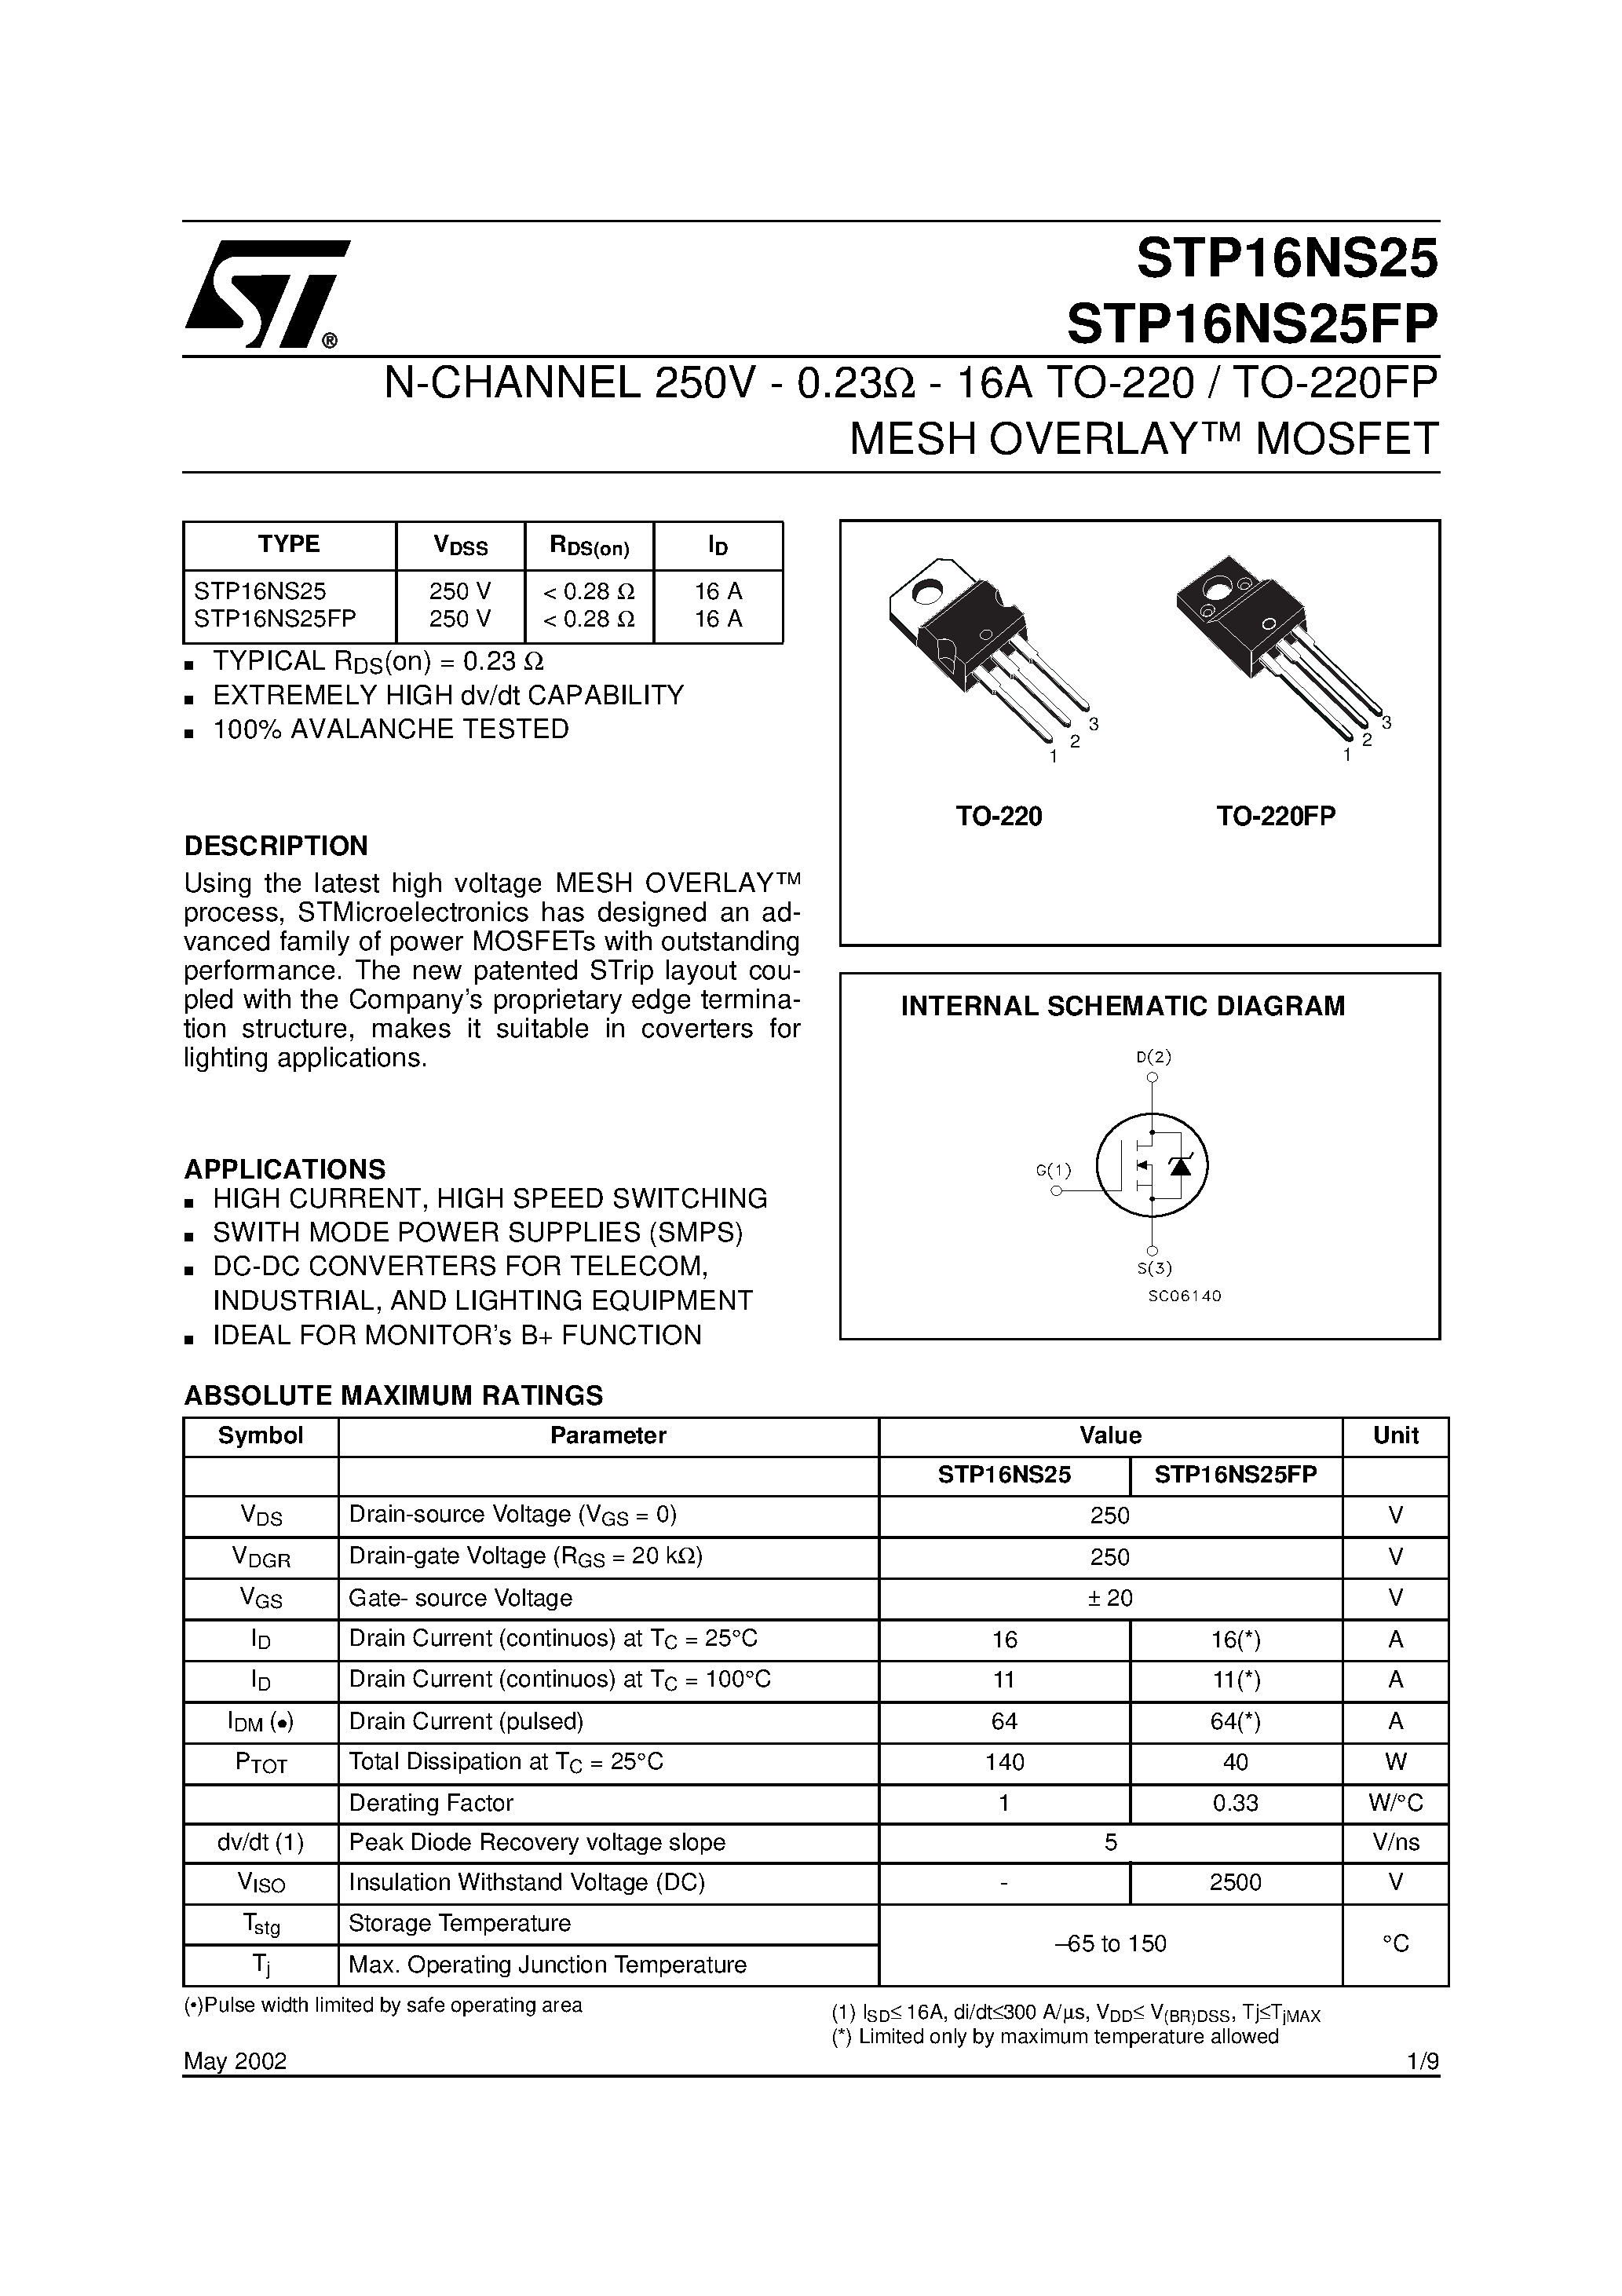 Datasheet STP16NS25 - N-CHANNEL 250V - 0.23ohm - 16A TO-220 / TO-220FP MESH OVERLAY MOSFET page 1